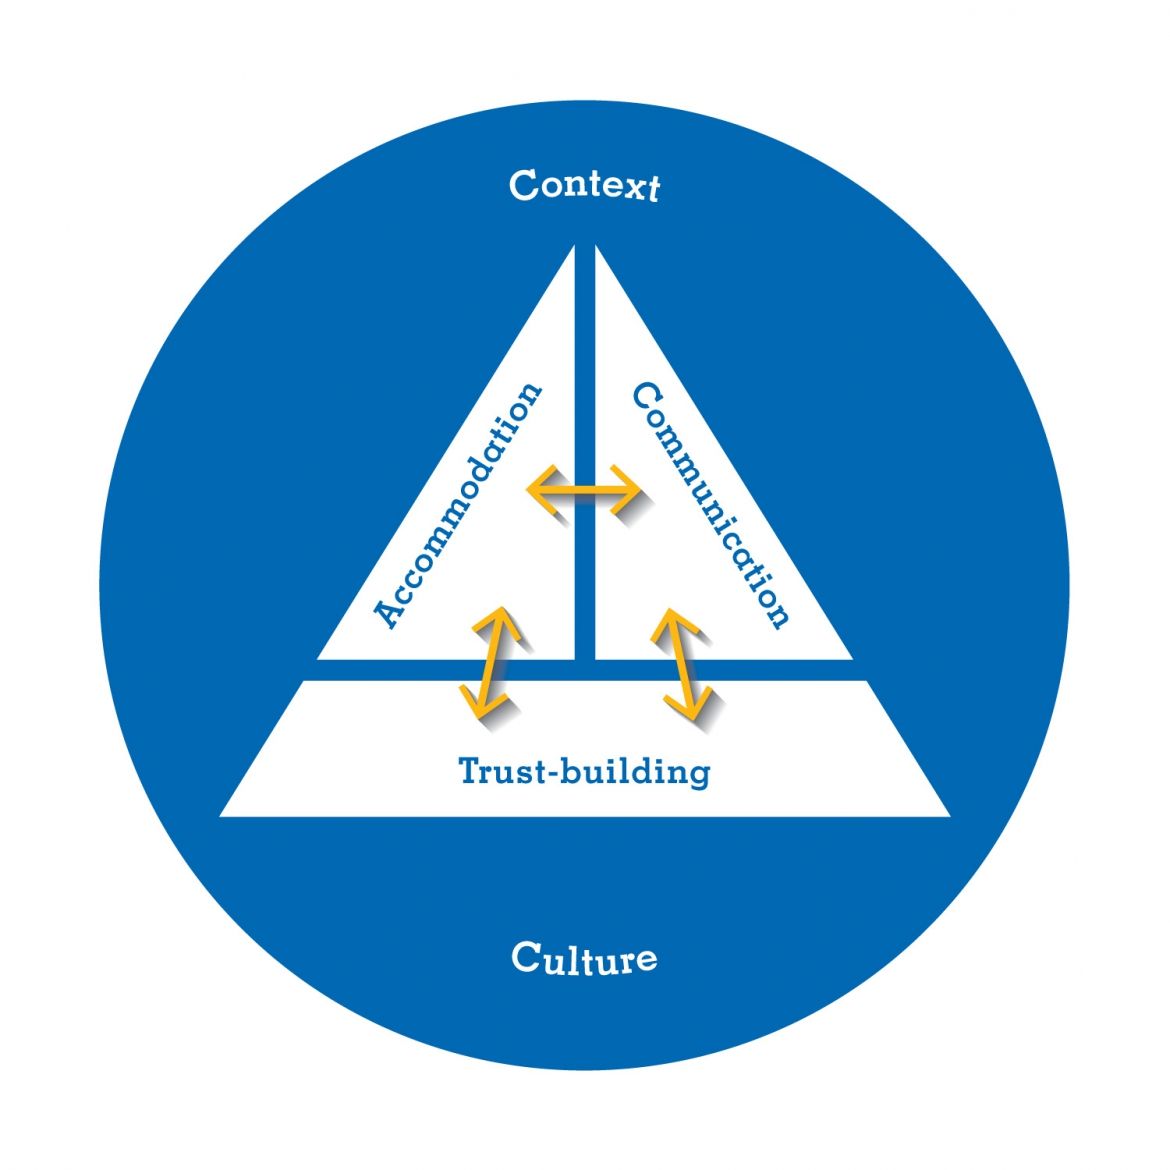 Diagram depicting interplay between the five identified themes. Three themes from a triangle in the center, with arrows showing reciprocal interactions between Accommodation, Communication, and Trust-Building. Surrounding the triangle is a circle representing the themes of Context and Culture, indicating their influence over the other themes.